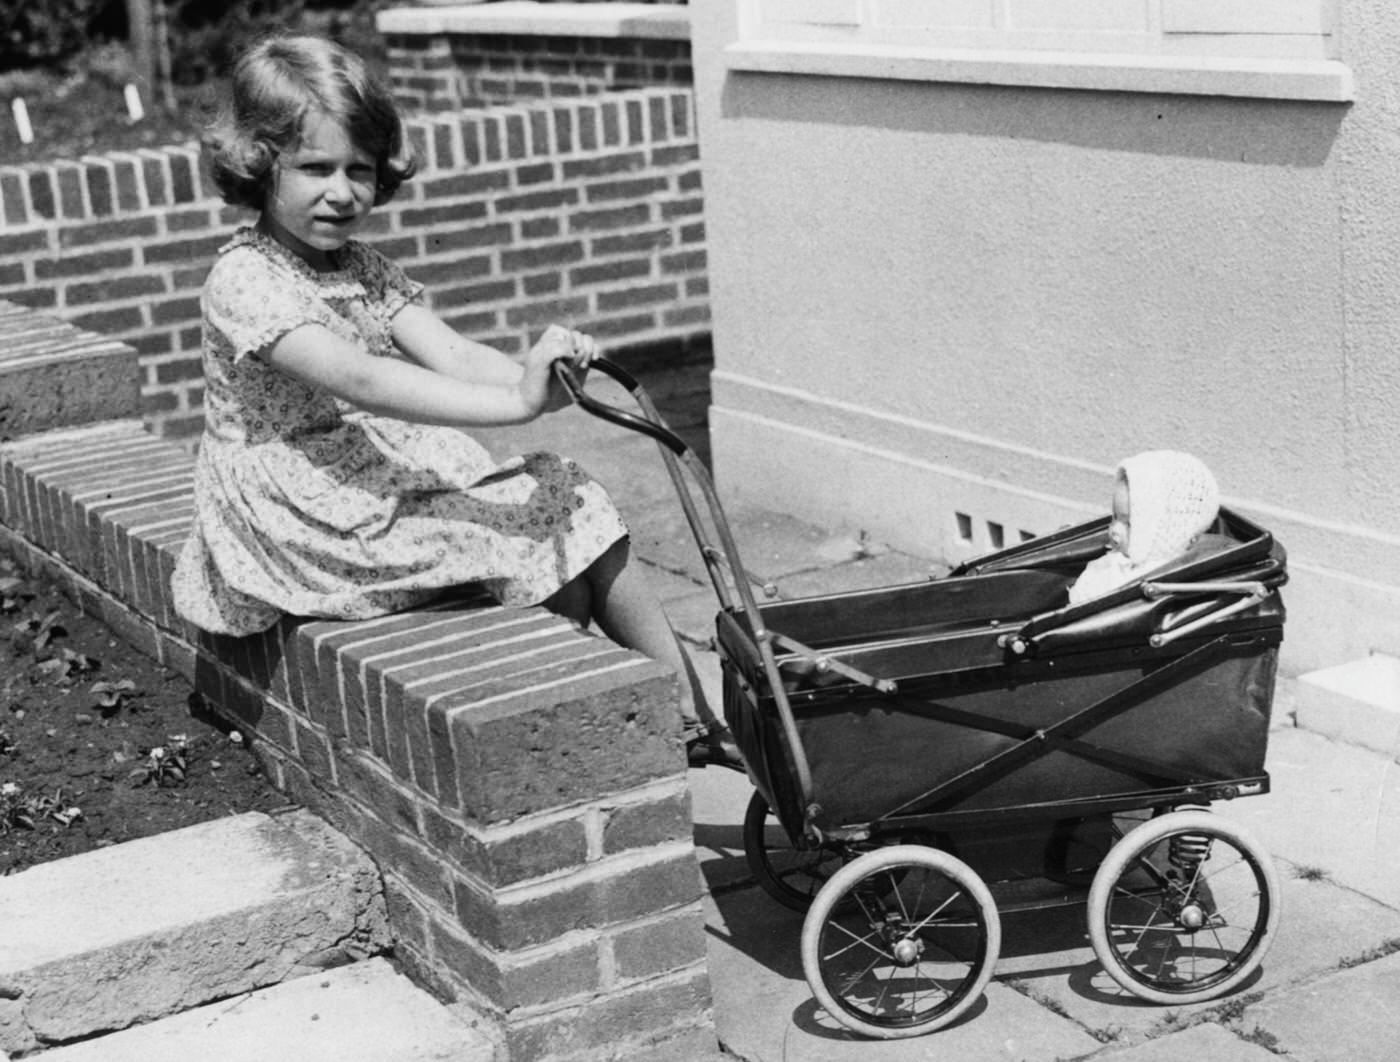 A childhood photograph from 1933 shows Queen Elizabeth II with a toy doll in a pram, in the grounds of the Royal Lodge at Windsor.